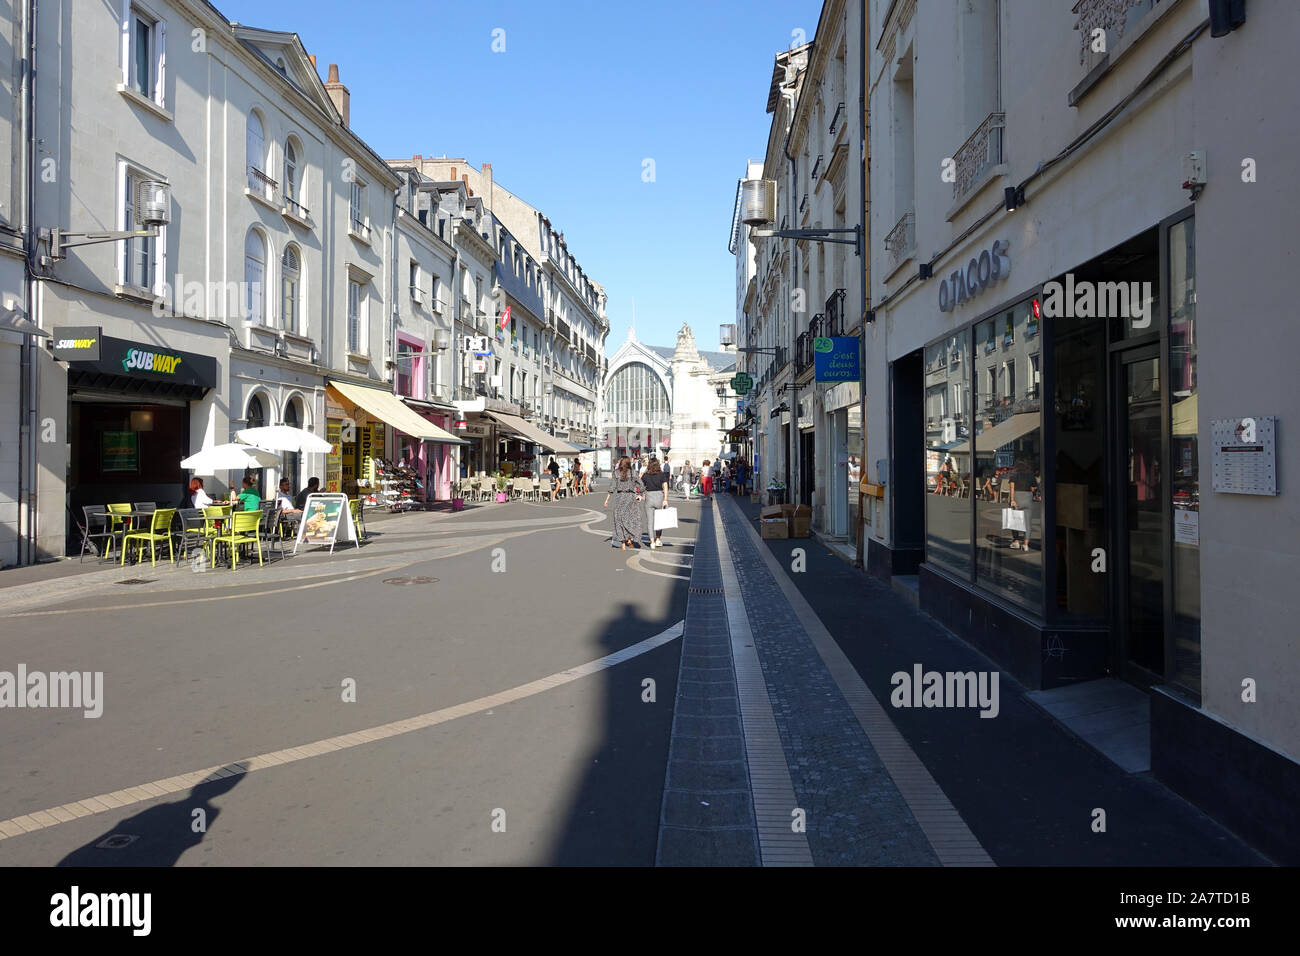 Tours, France 31 July 2019: Shops and people along the pedestrianised Rue de Bordeaux in Tours, France Stock Photo